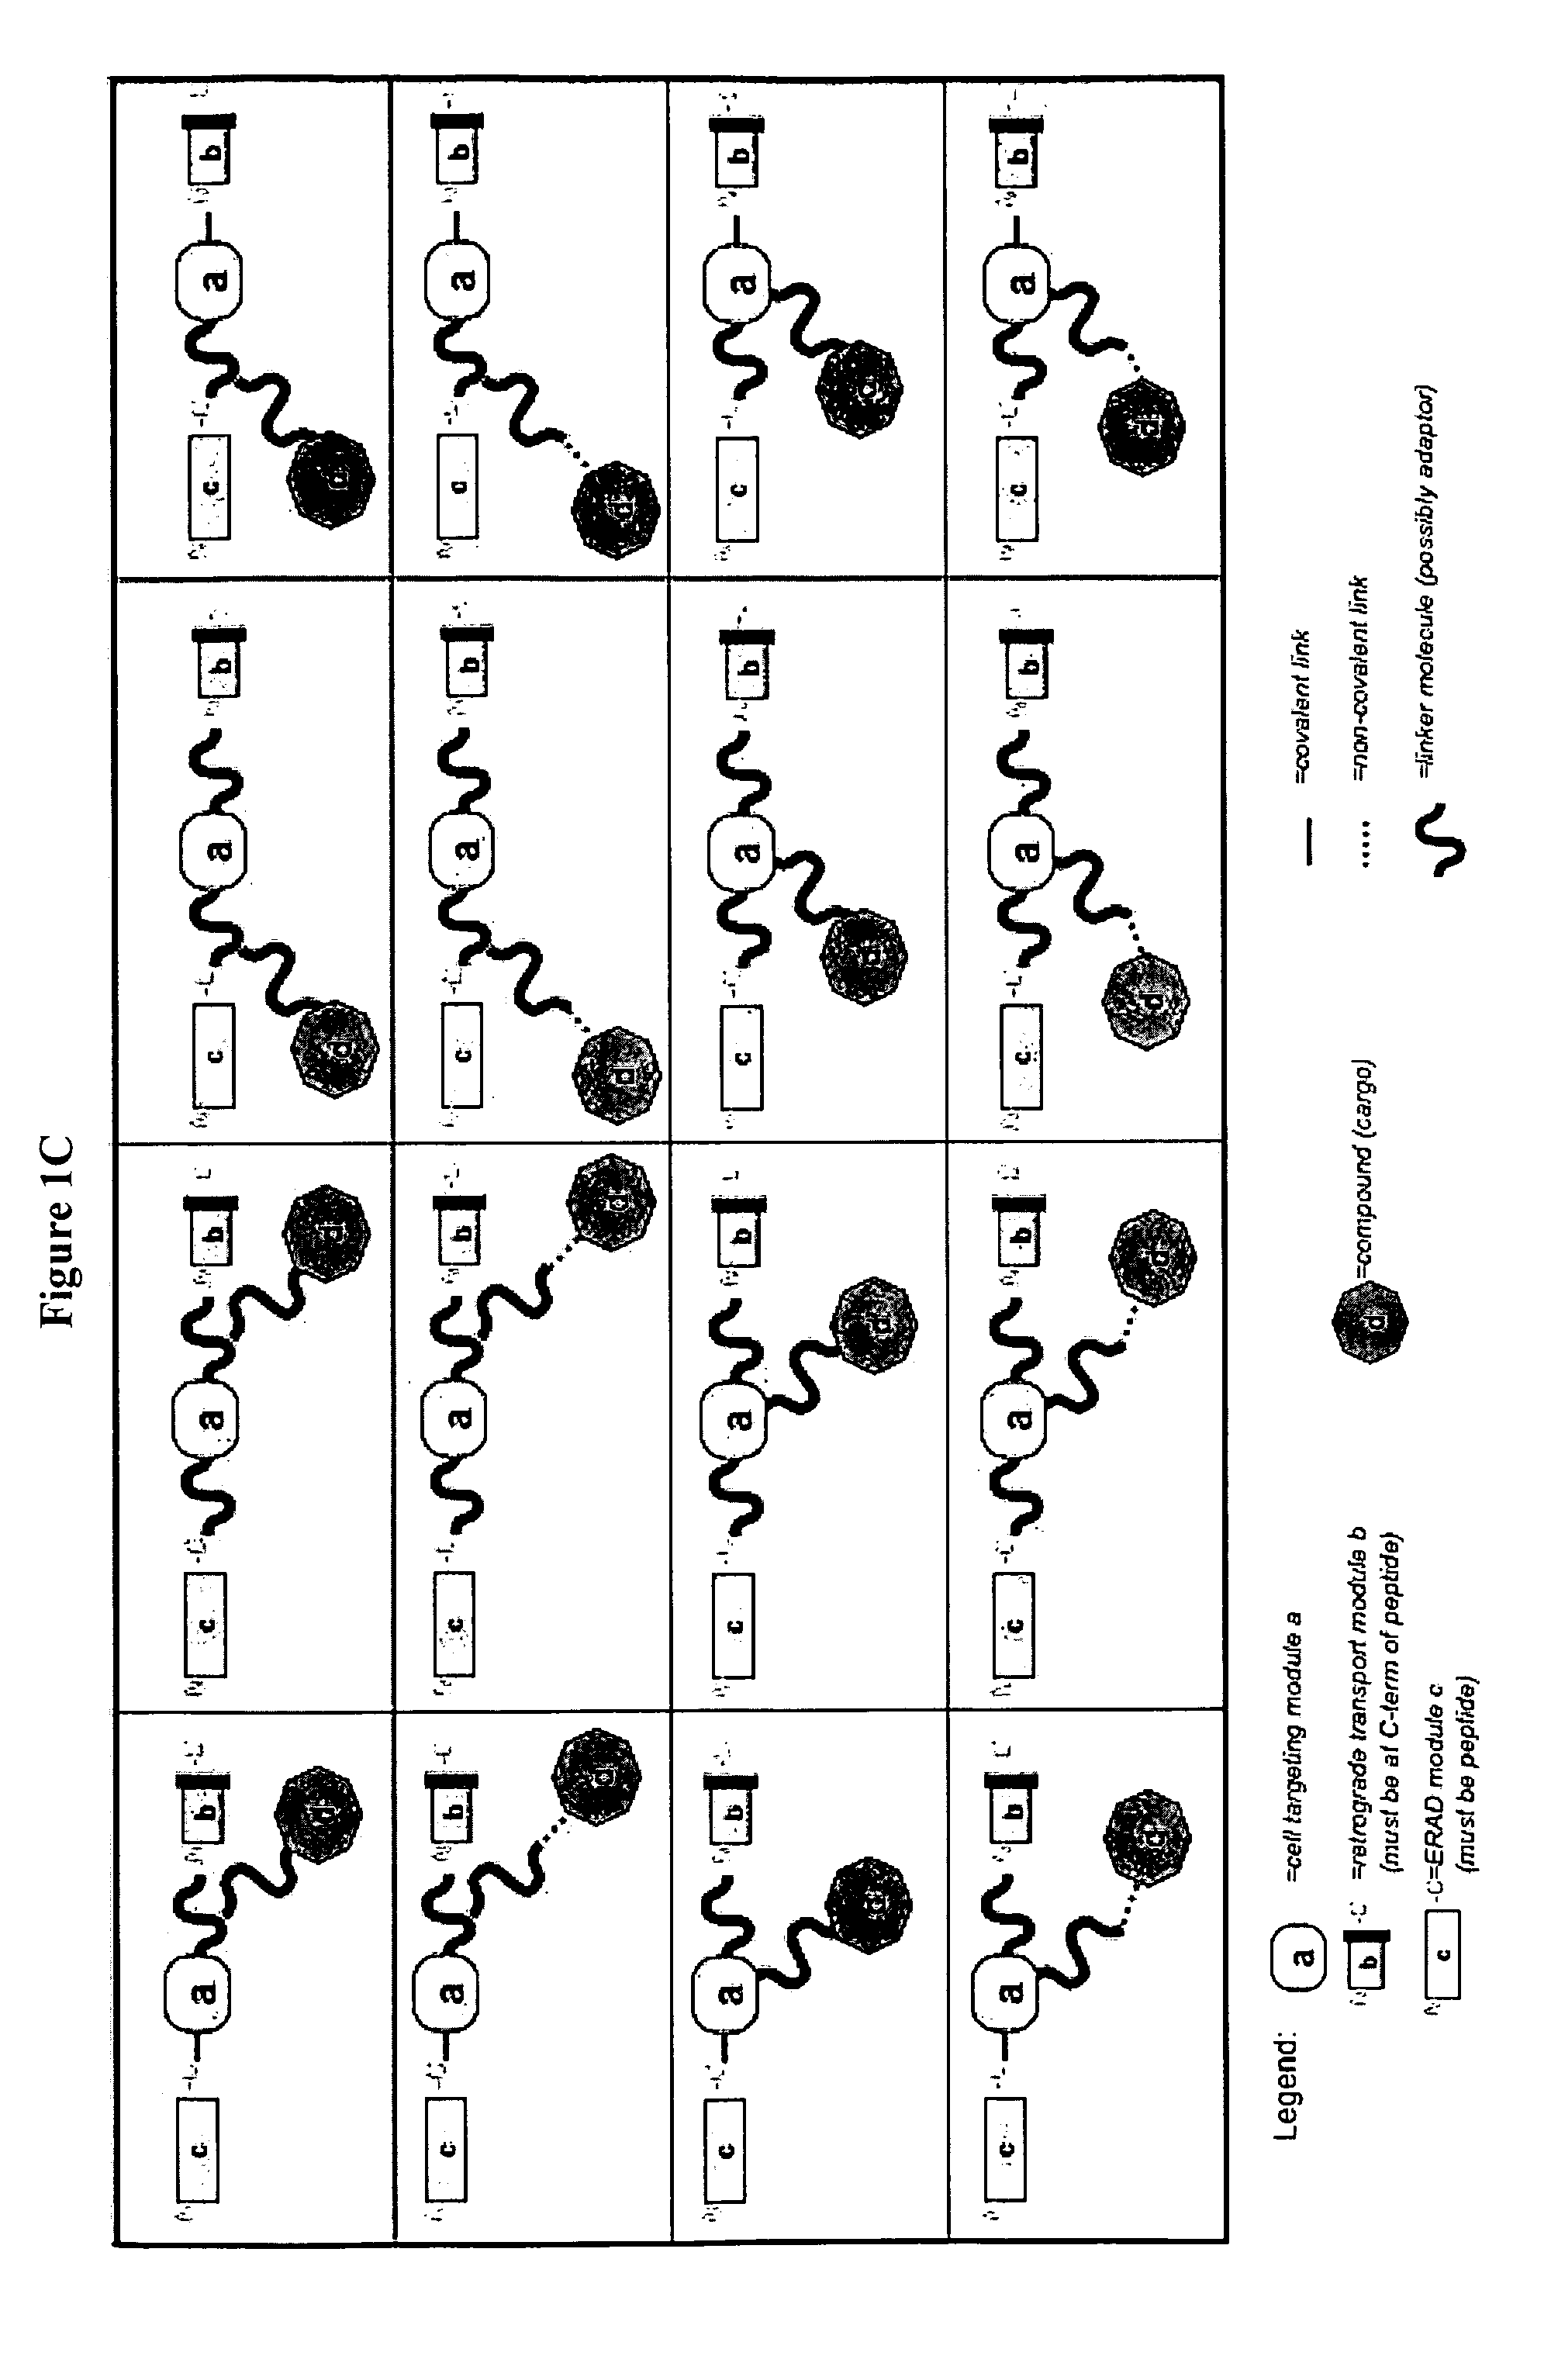 Delivery System and Conjugates For Compound Delivery Via Naturally Occurring Intracellular Transport Routes